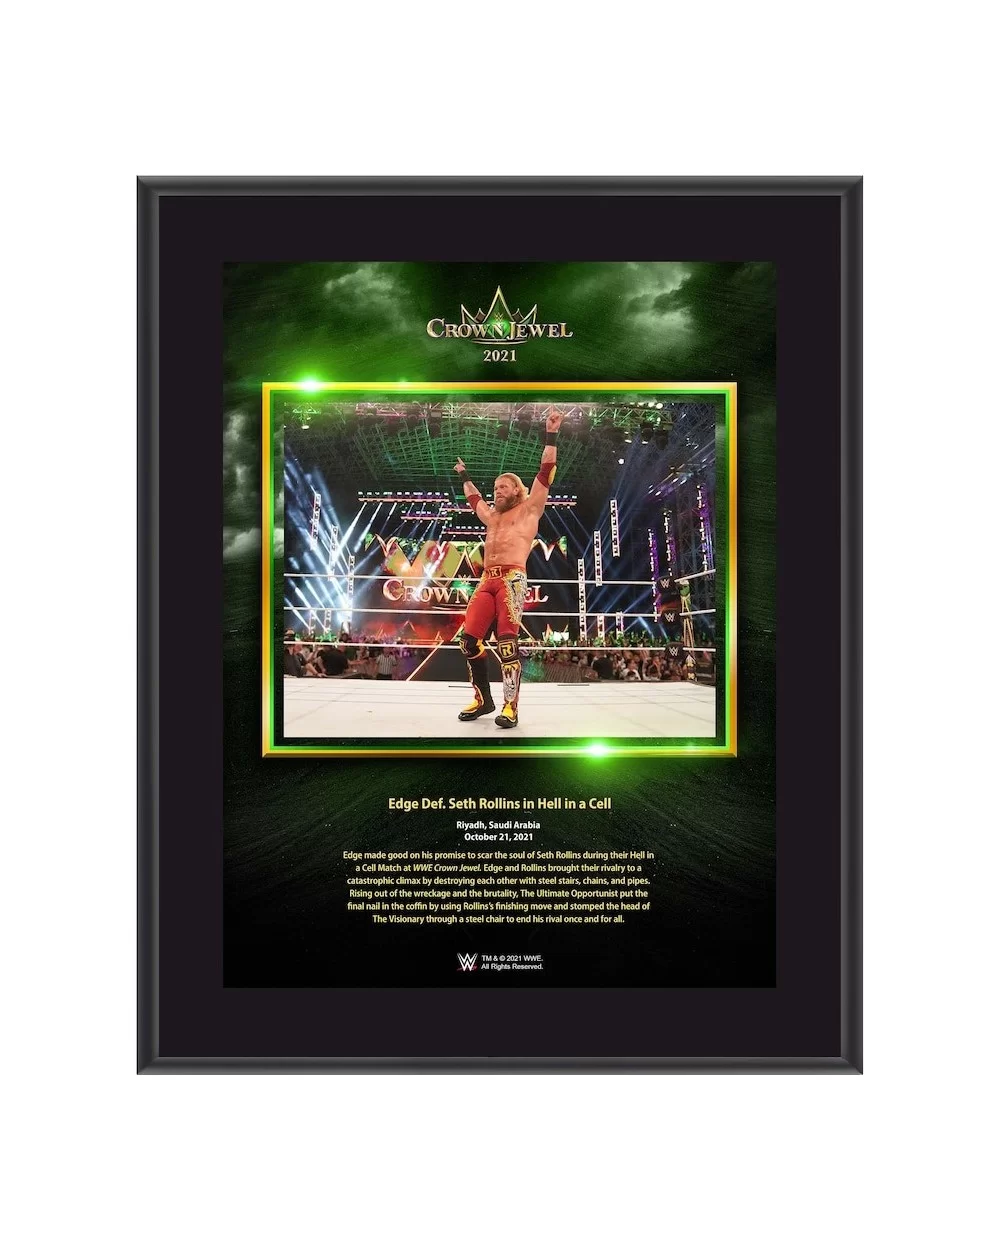 Edge Framed 10.5" x 13" 2021 Crown Jewel Sublimated Plaque $8.40 Home & Office